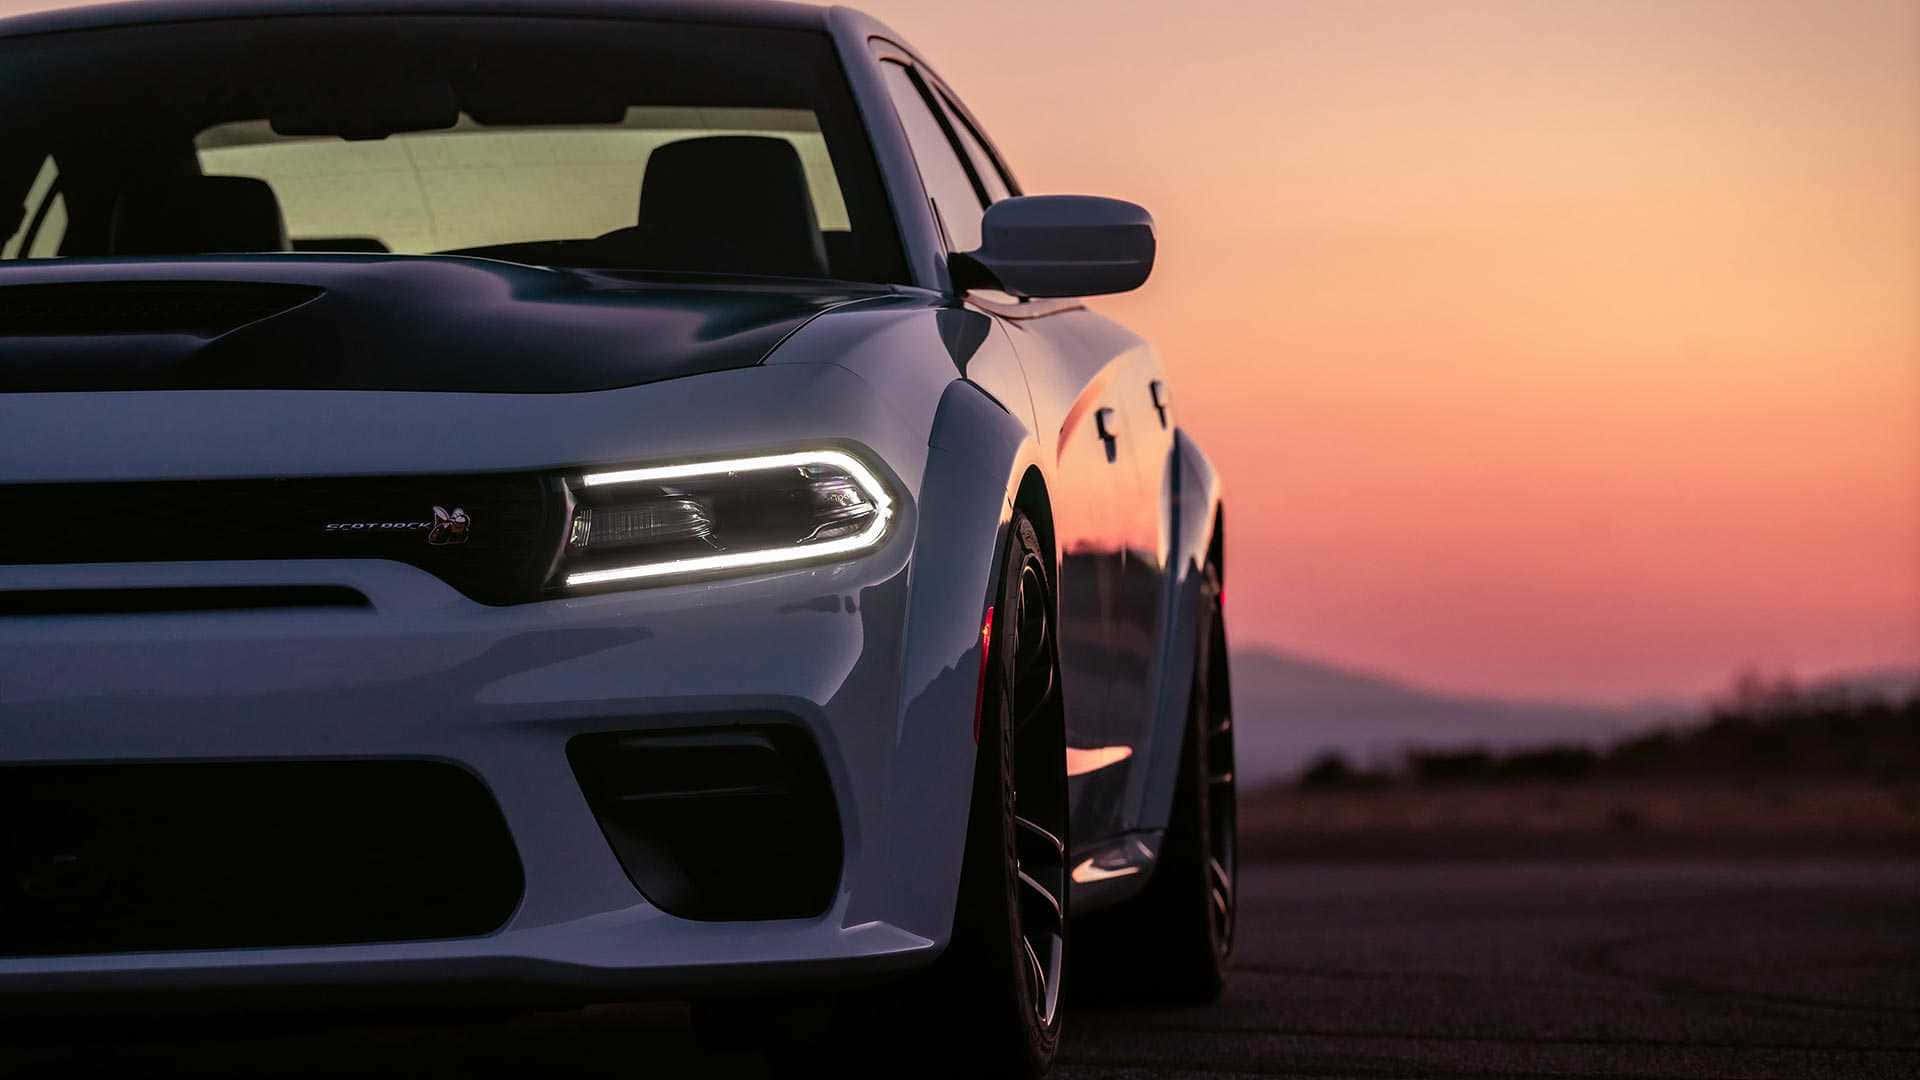 Dodgecharger Srt Is A High-performance Car With A Stunning Design. It Is Perfect For People Who Love Speed And Power. Wallpaper